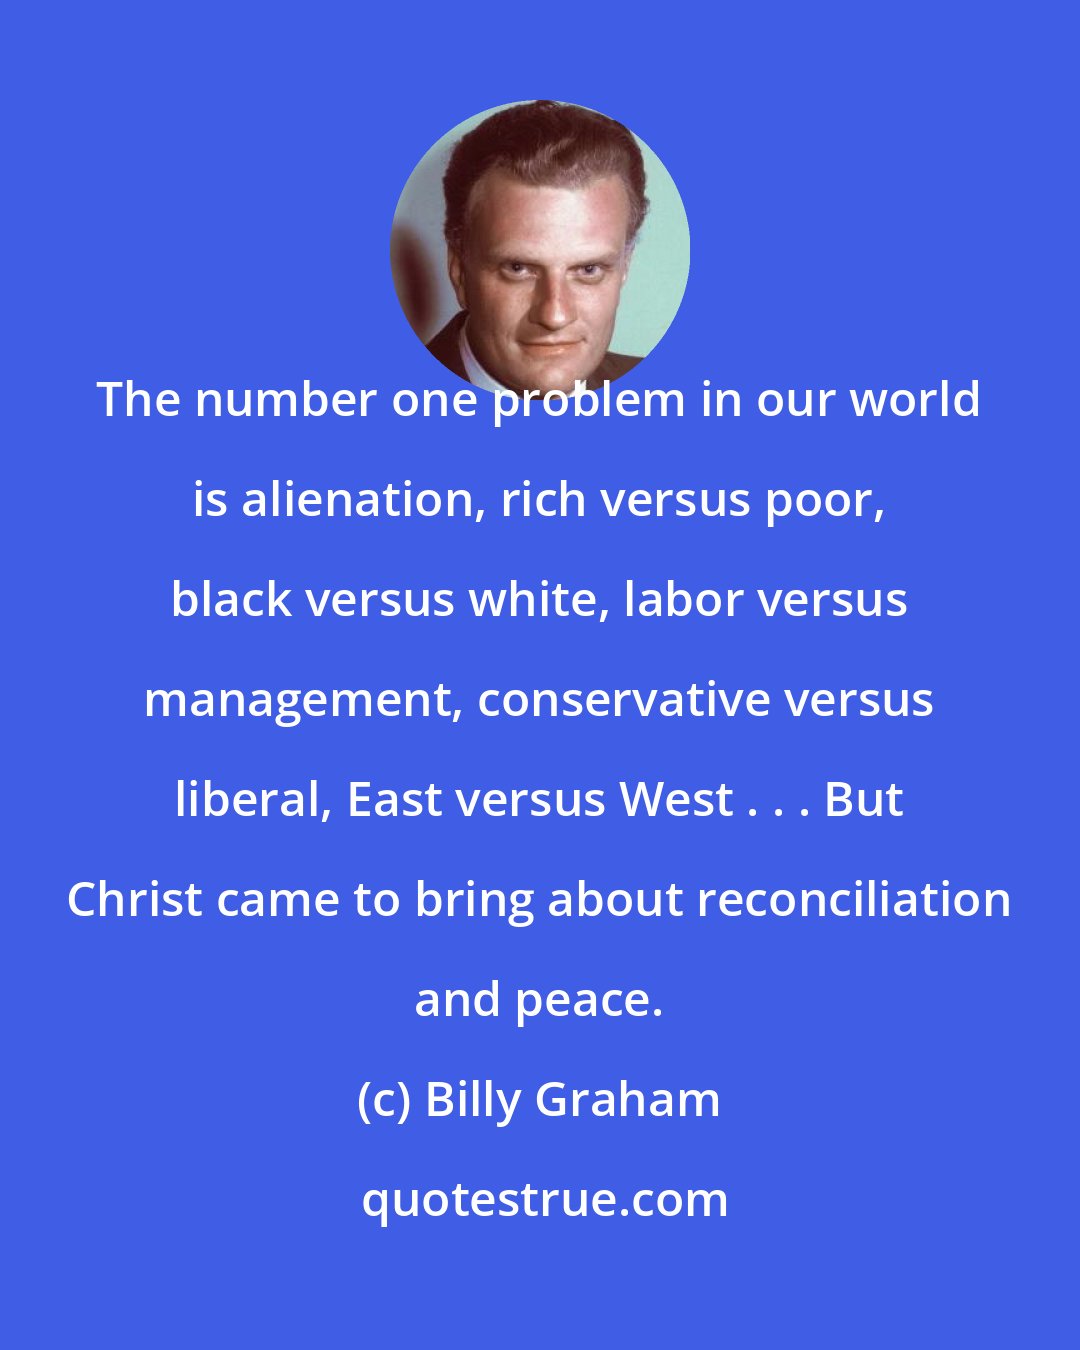 Billy Graham: The number one problem in our world is alienation, rich versus poor, black versus white, labor versus management, conservative versus liberal, East versus West . . . But Christ came to bring about reconciliation and peace.